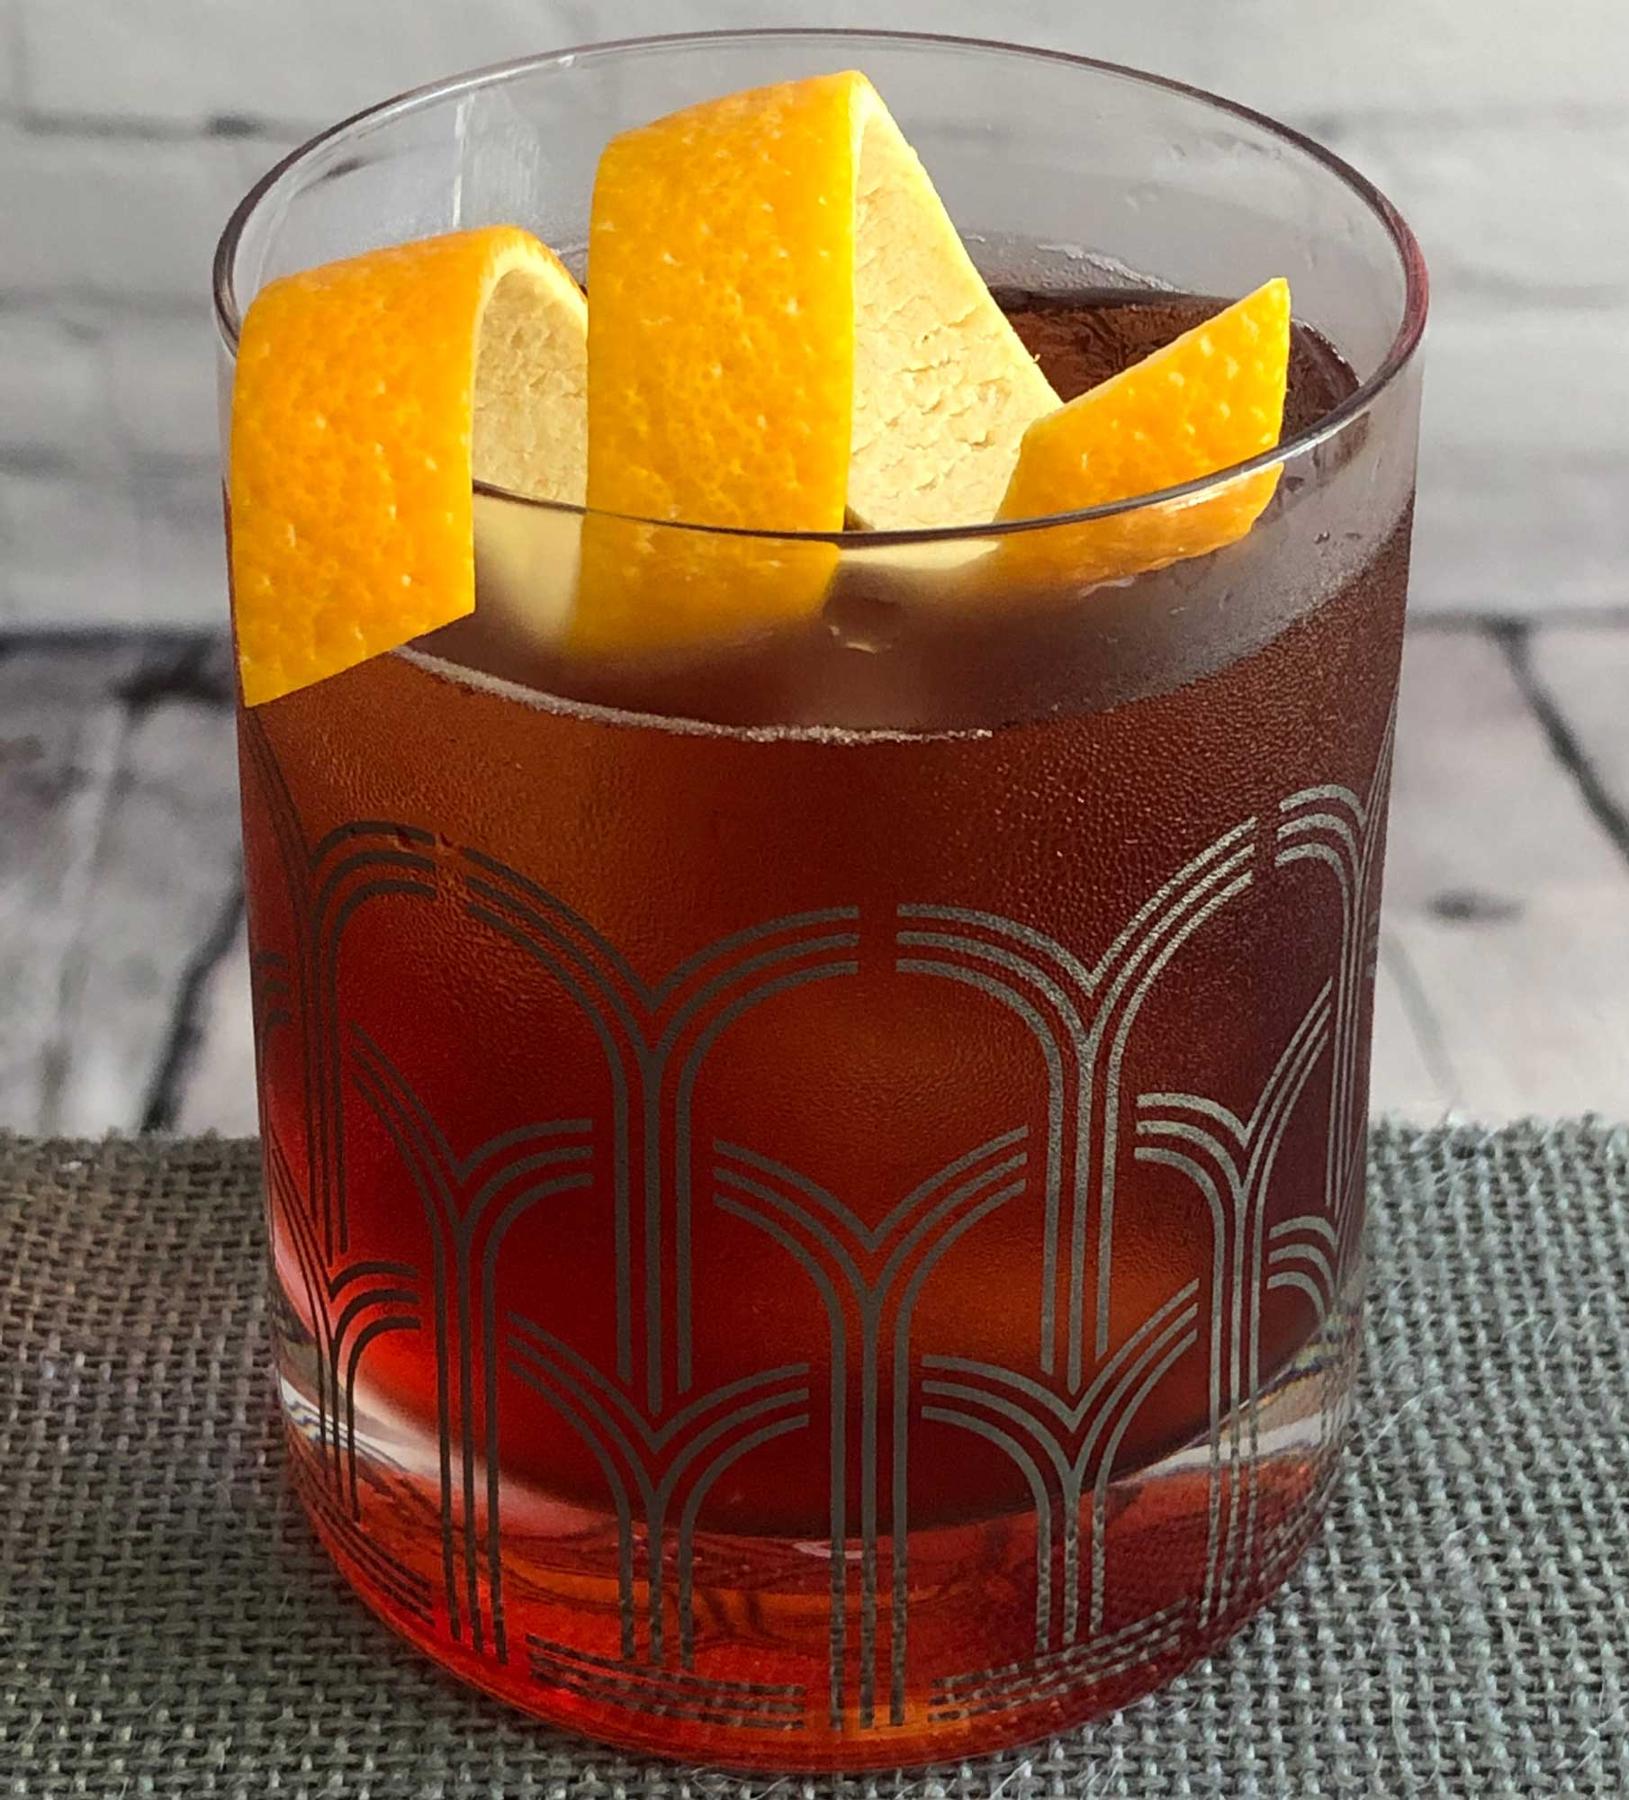 An example of the Chin-Chin, the mixed drink (drink) featuring Aperitivo Cappelletti, tonic water, Cocchi Barolo Chinato, and orange twist; photo by Lee Edwards